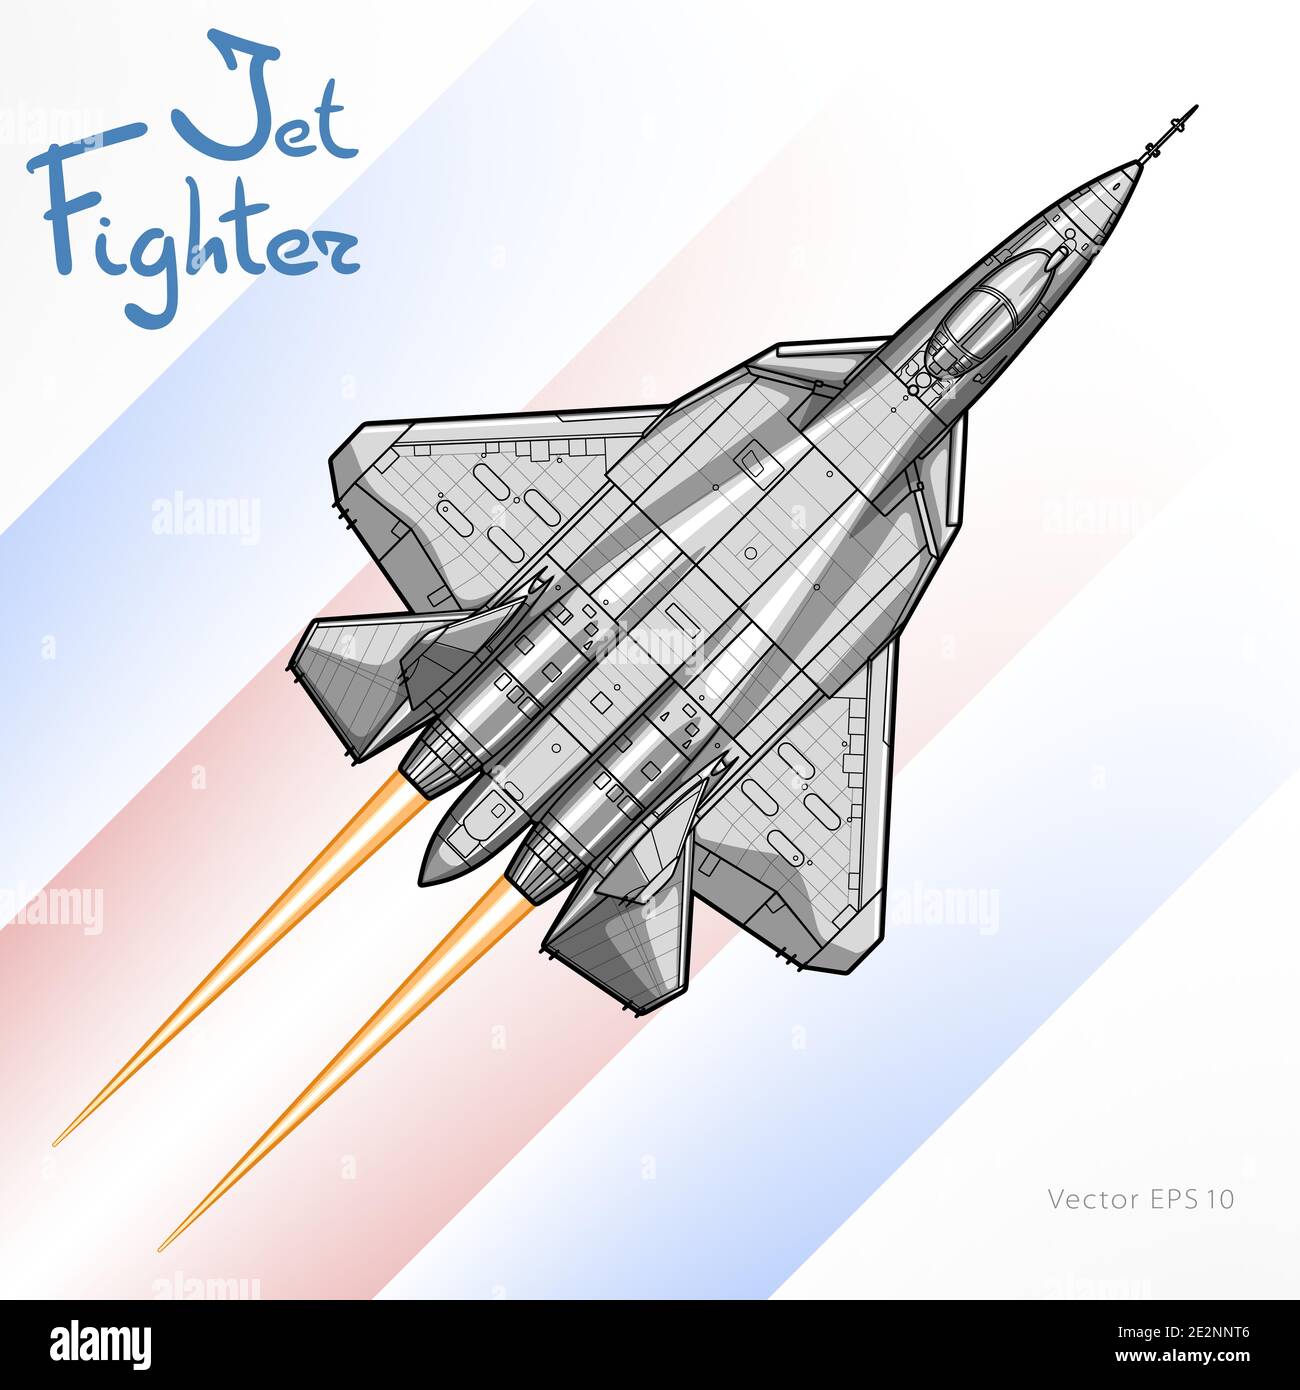 Military Naval Fighter Jet Airplane Cartoon Stock Vector (Royalty Free)  1086892508 | Shutterstock